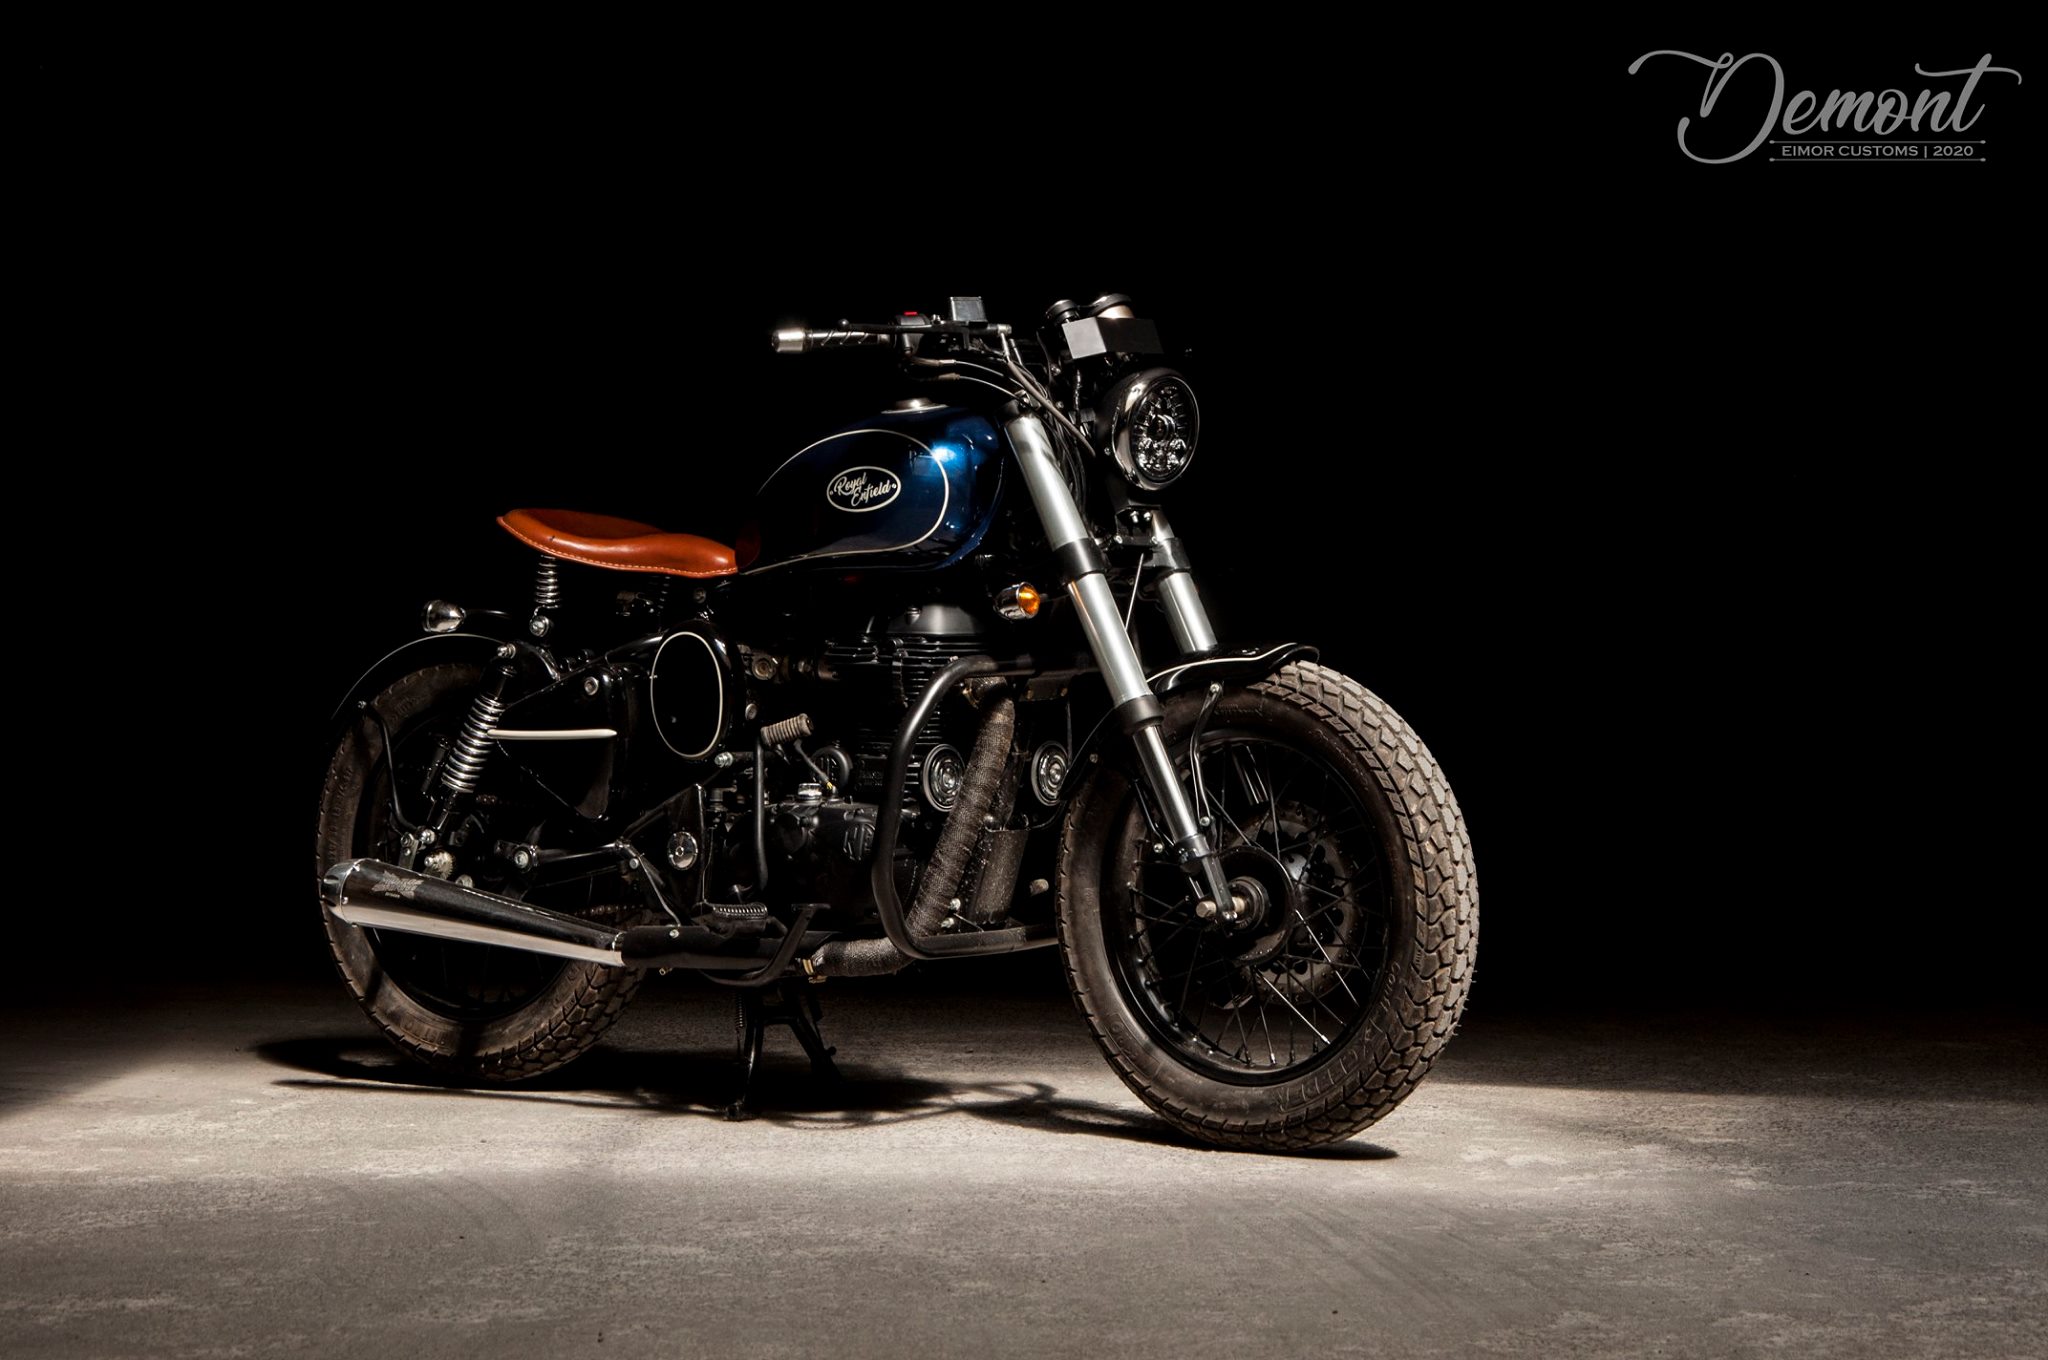 Meet 500cc Royal Enfield Demont Bobber by EIMOR Customs - picture